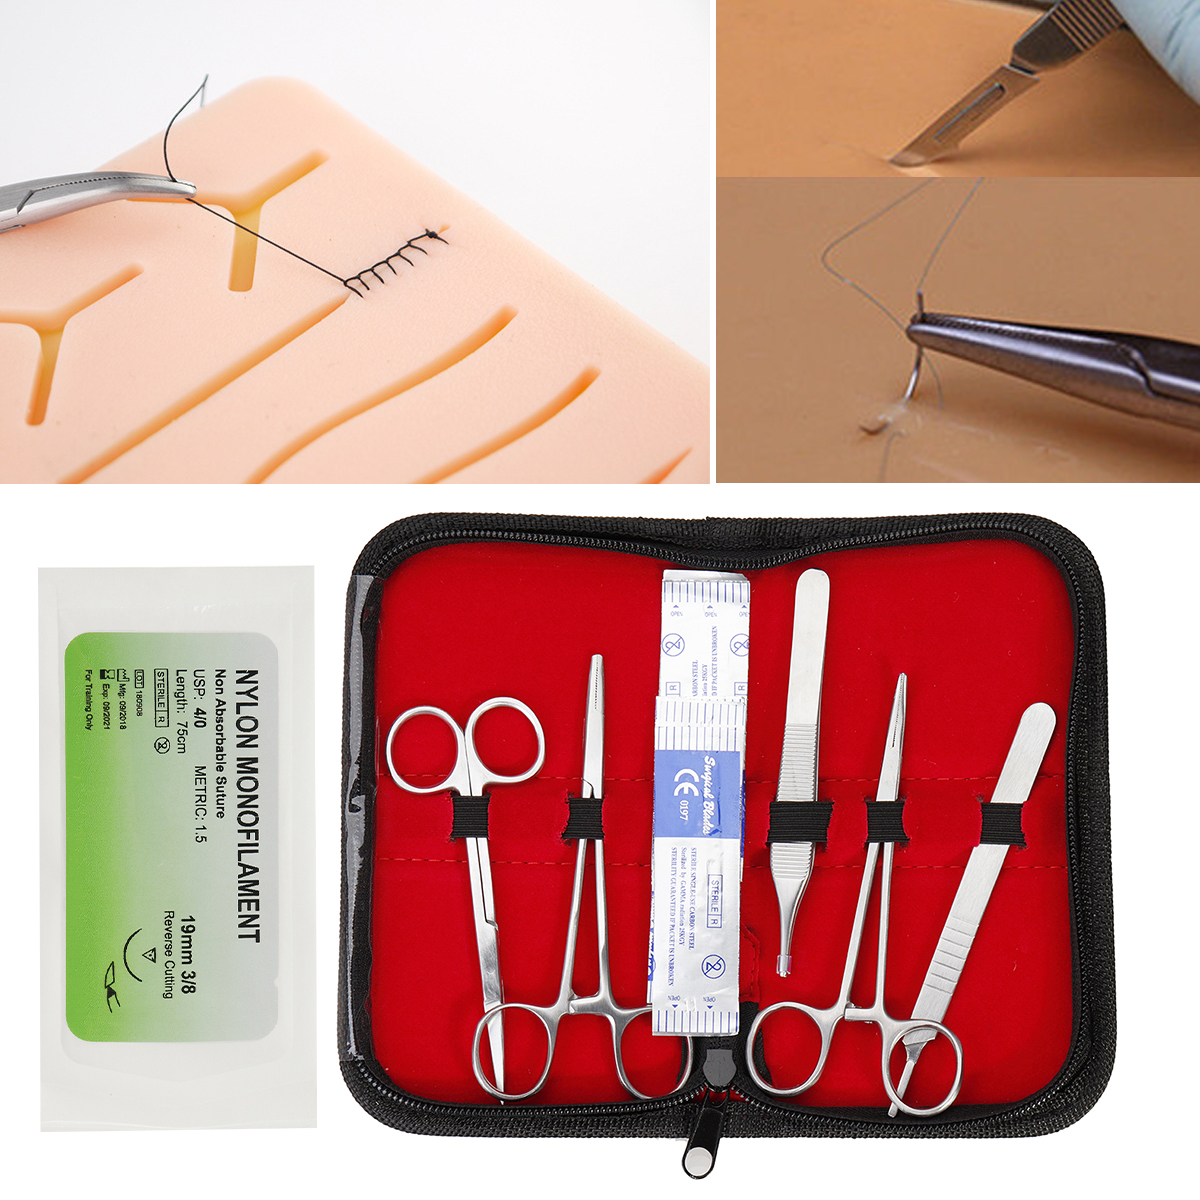 25-In-1-Skin-Suture-Surgical-Training-Kit-Silicone-Pad-Needle-Scissors-Tools-Kit-1417313-2